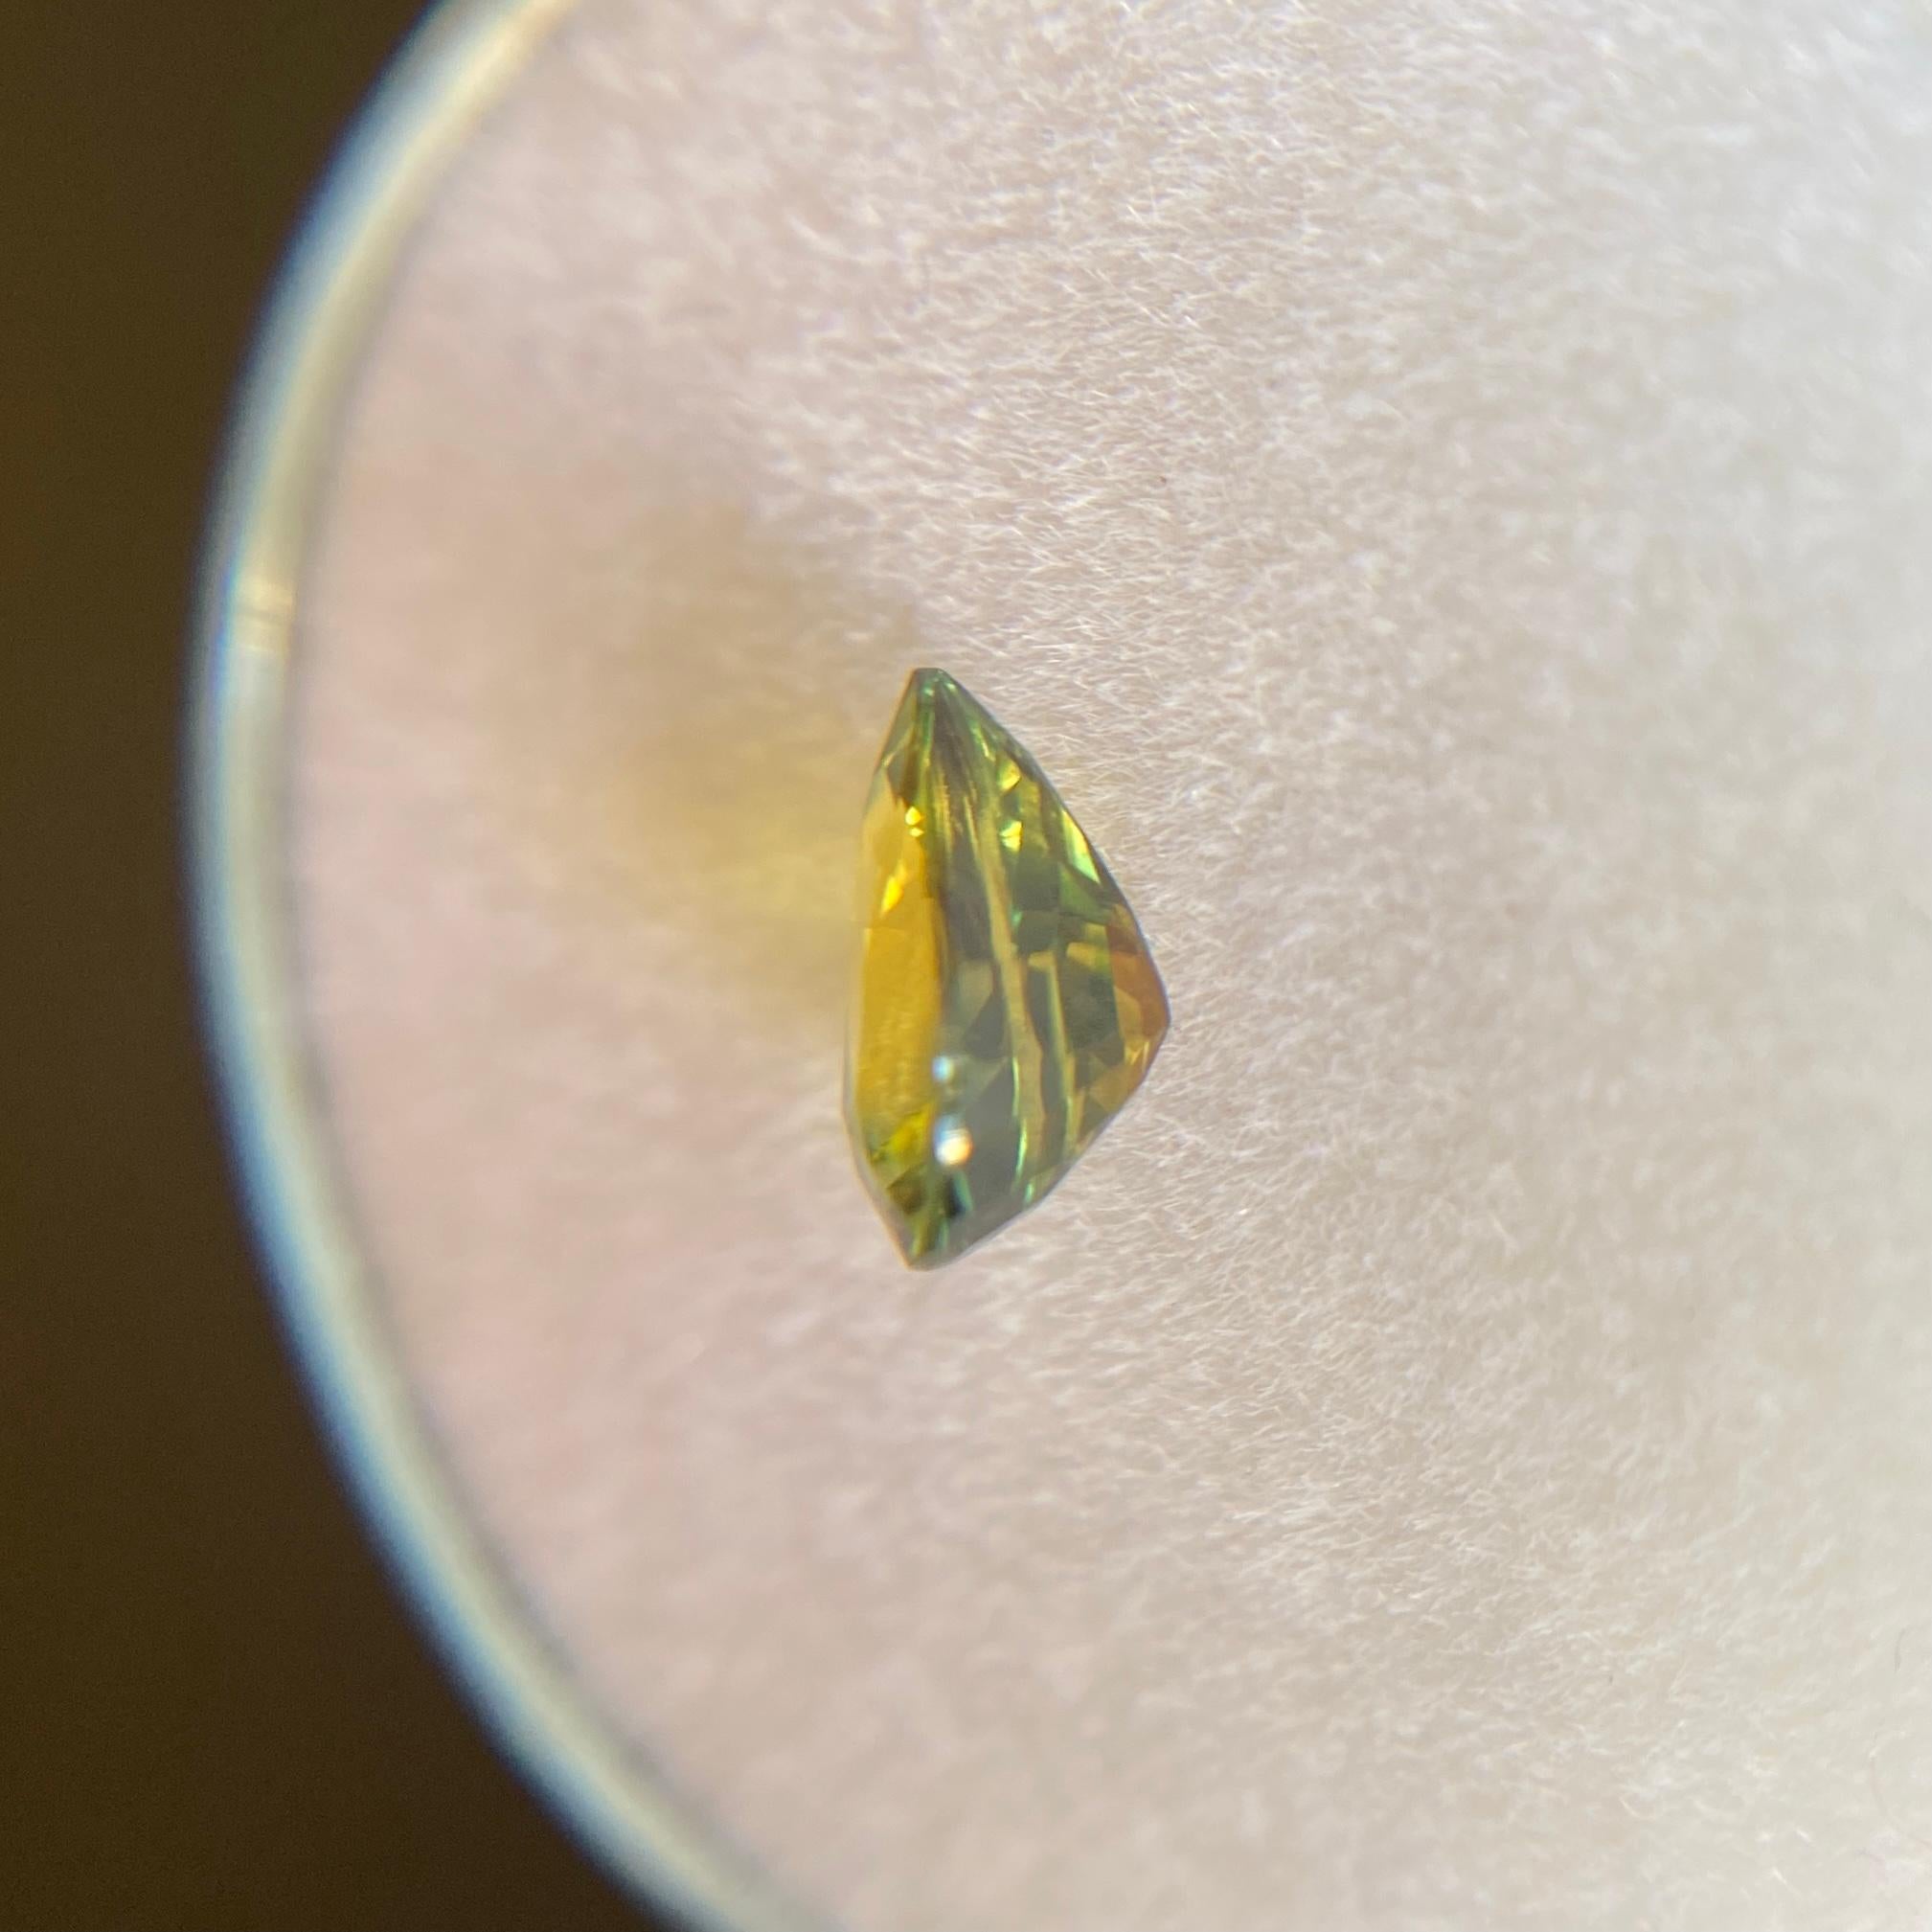 Rare Bluish Yellow Parti Colour Australian Sapphire Gemstone.

0.81 Carat with a beautiful and unique yellow blue colour. Very rare and stunning to see. Also has excellent clarity, a very clean stone with only some small natural inclusions visible